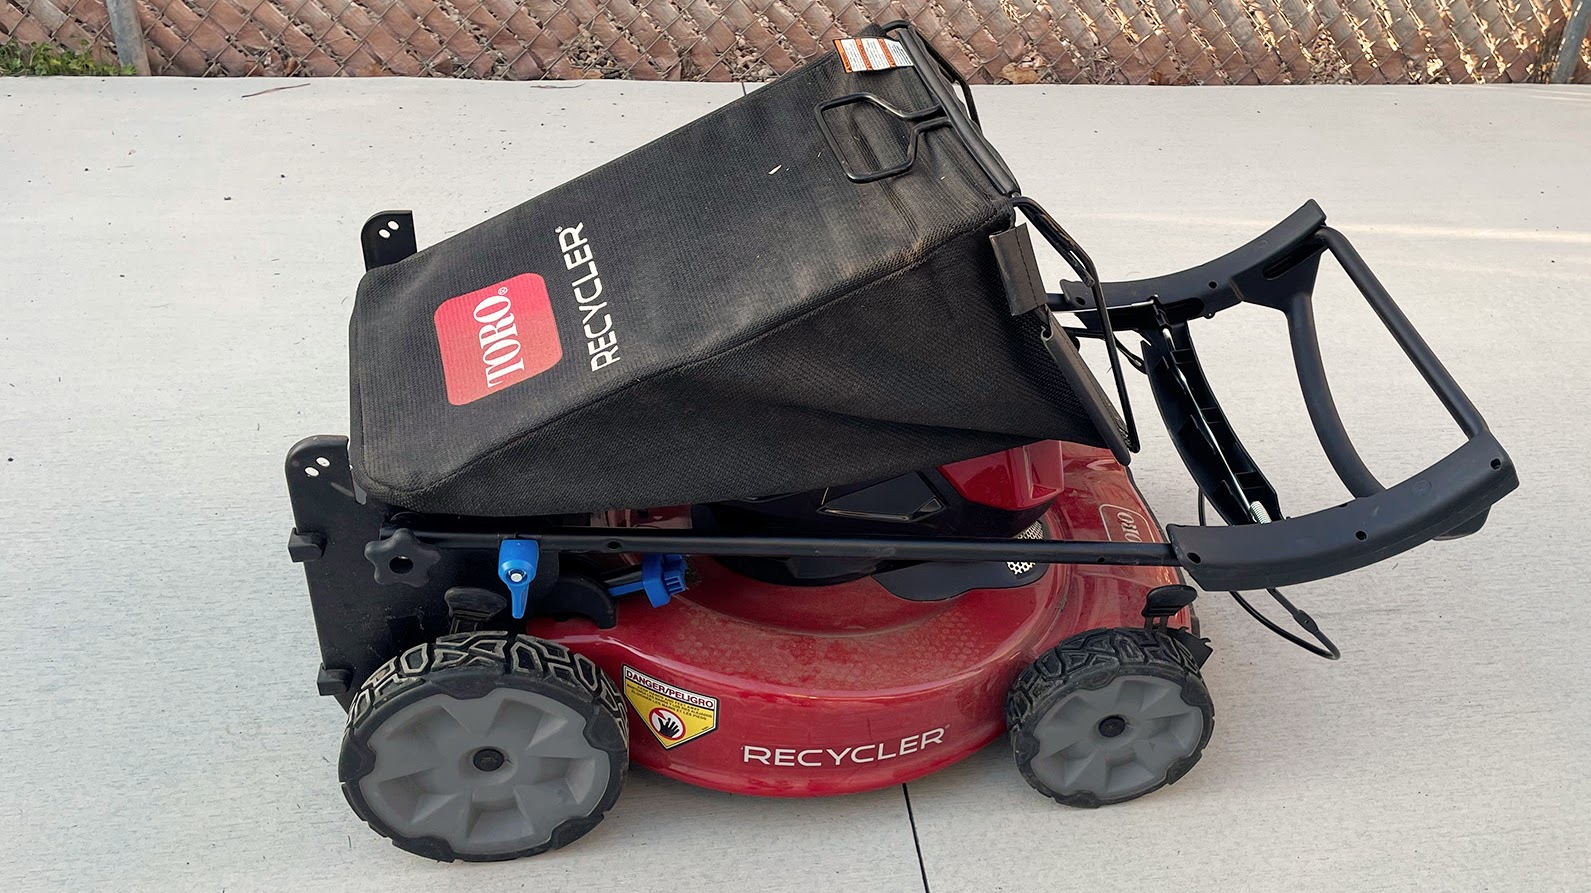 Toro 60V Max 22in Recycler Lawn Mower being tested in writer's home